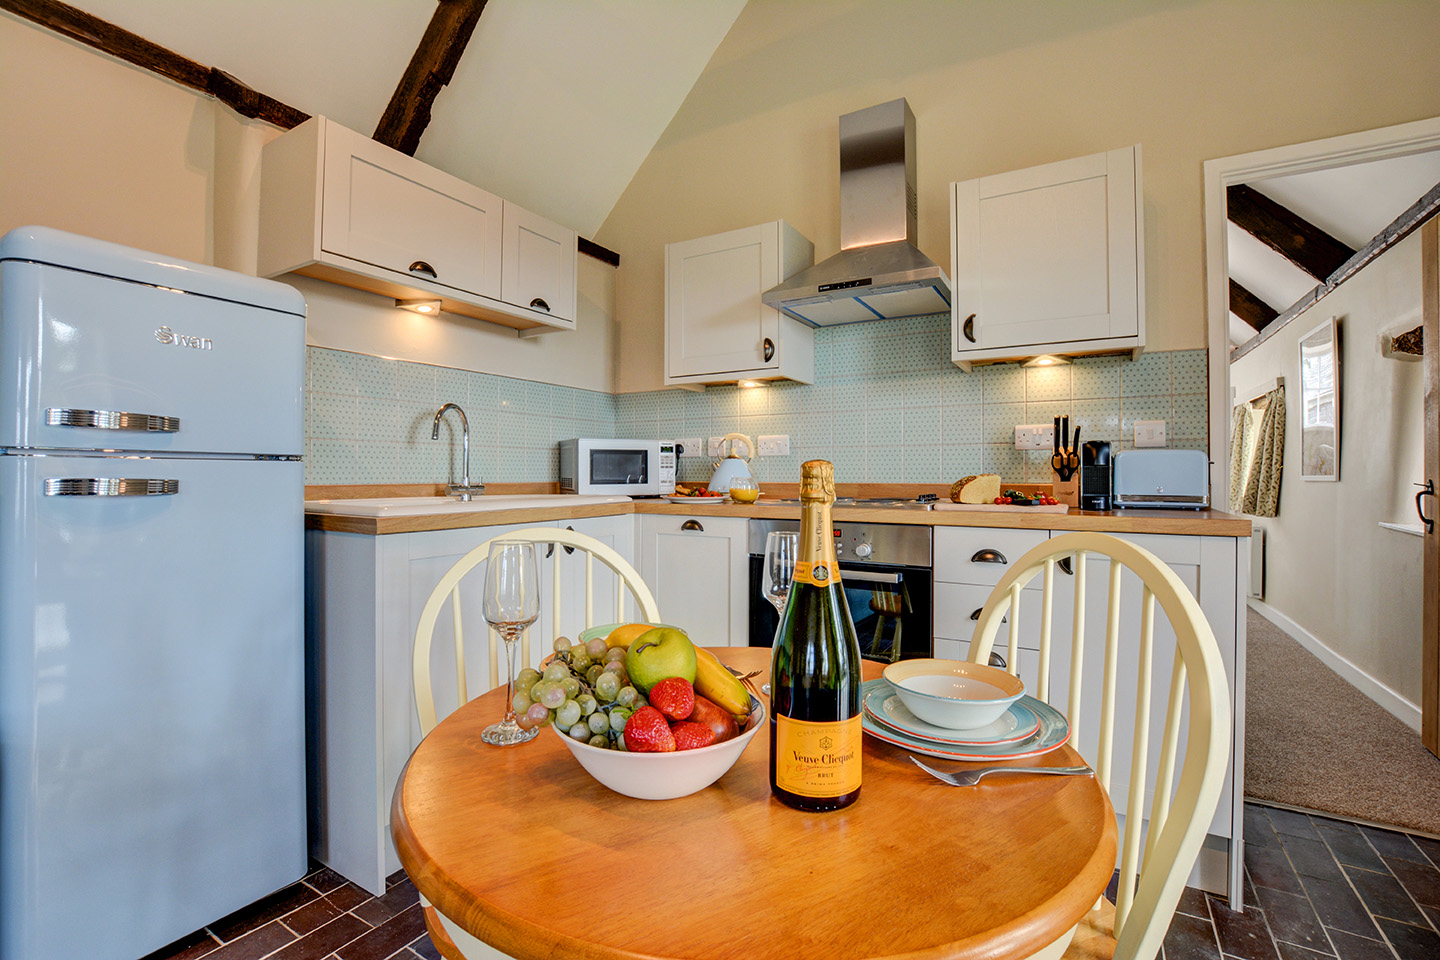 The kitchen diner at Jingles luxury self catering holiday cottage at Penrose Burden in North Cornwall near Bodmin Moor01.jpg